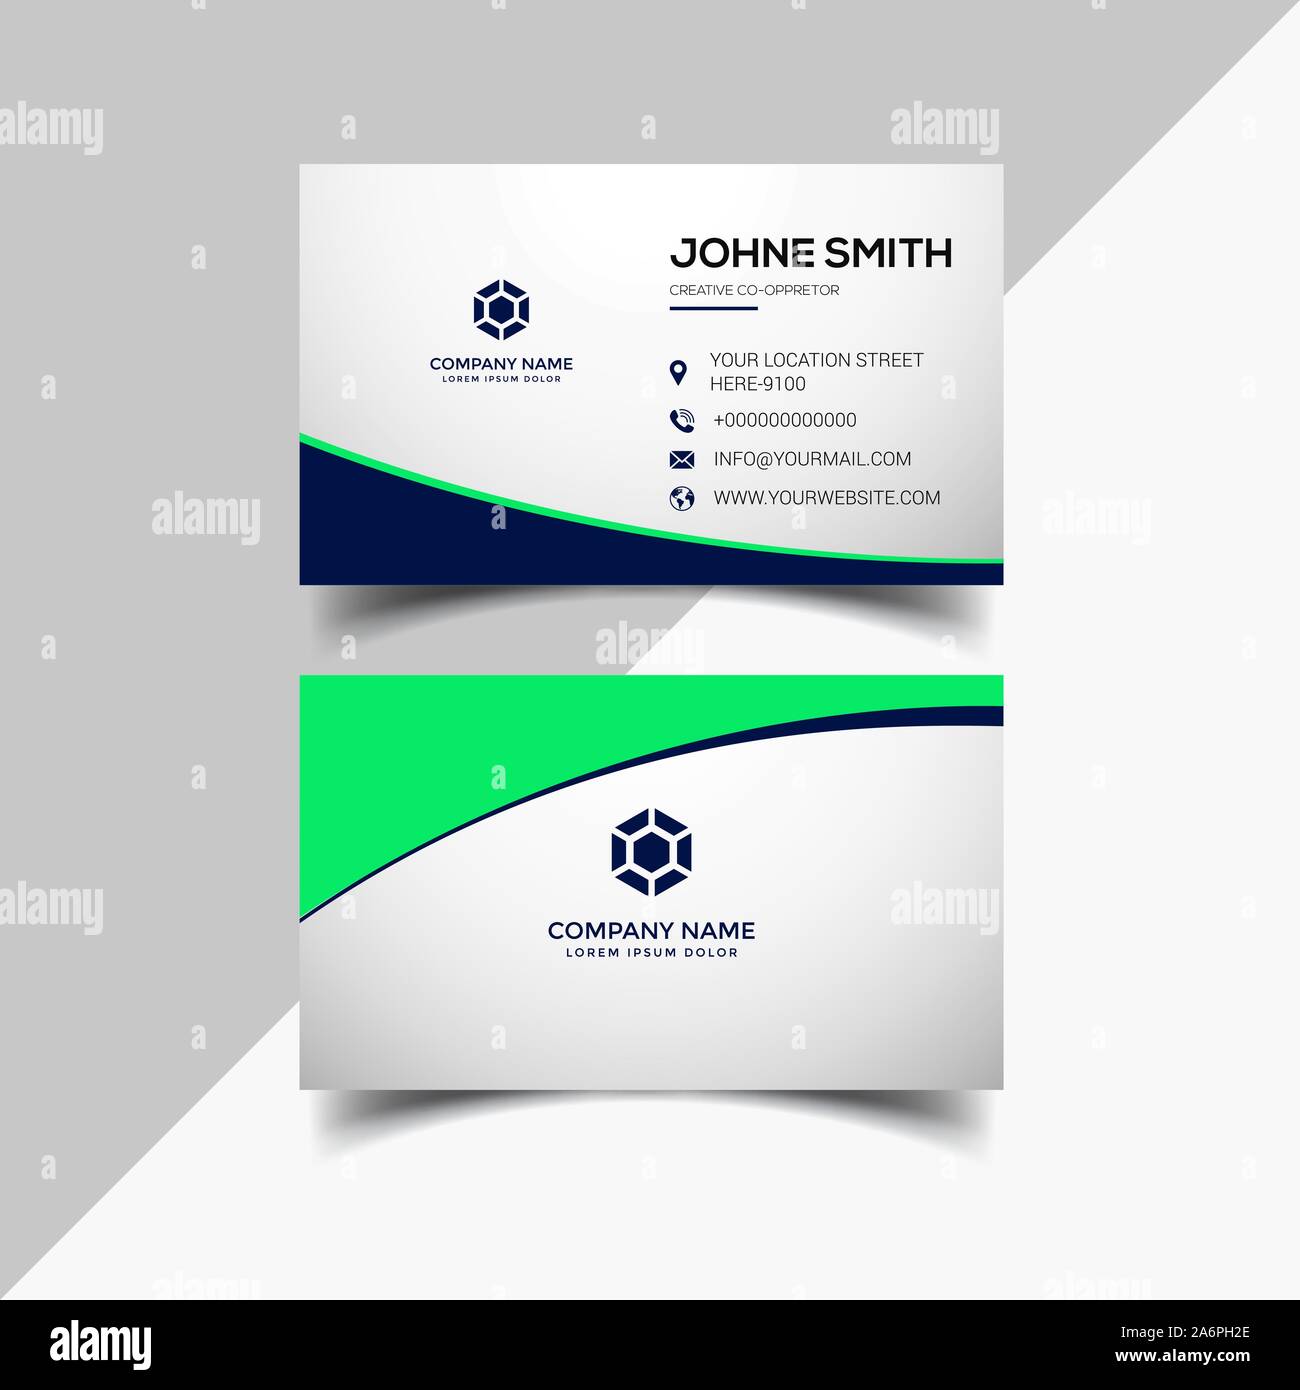 Modern Creative and Clean Business Card Template Stock Vector